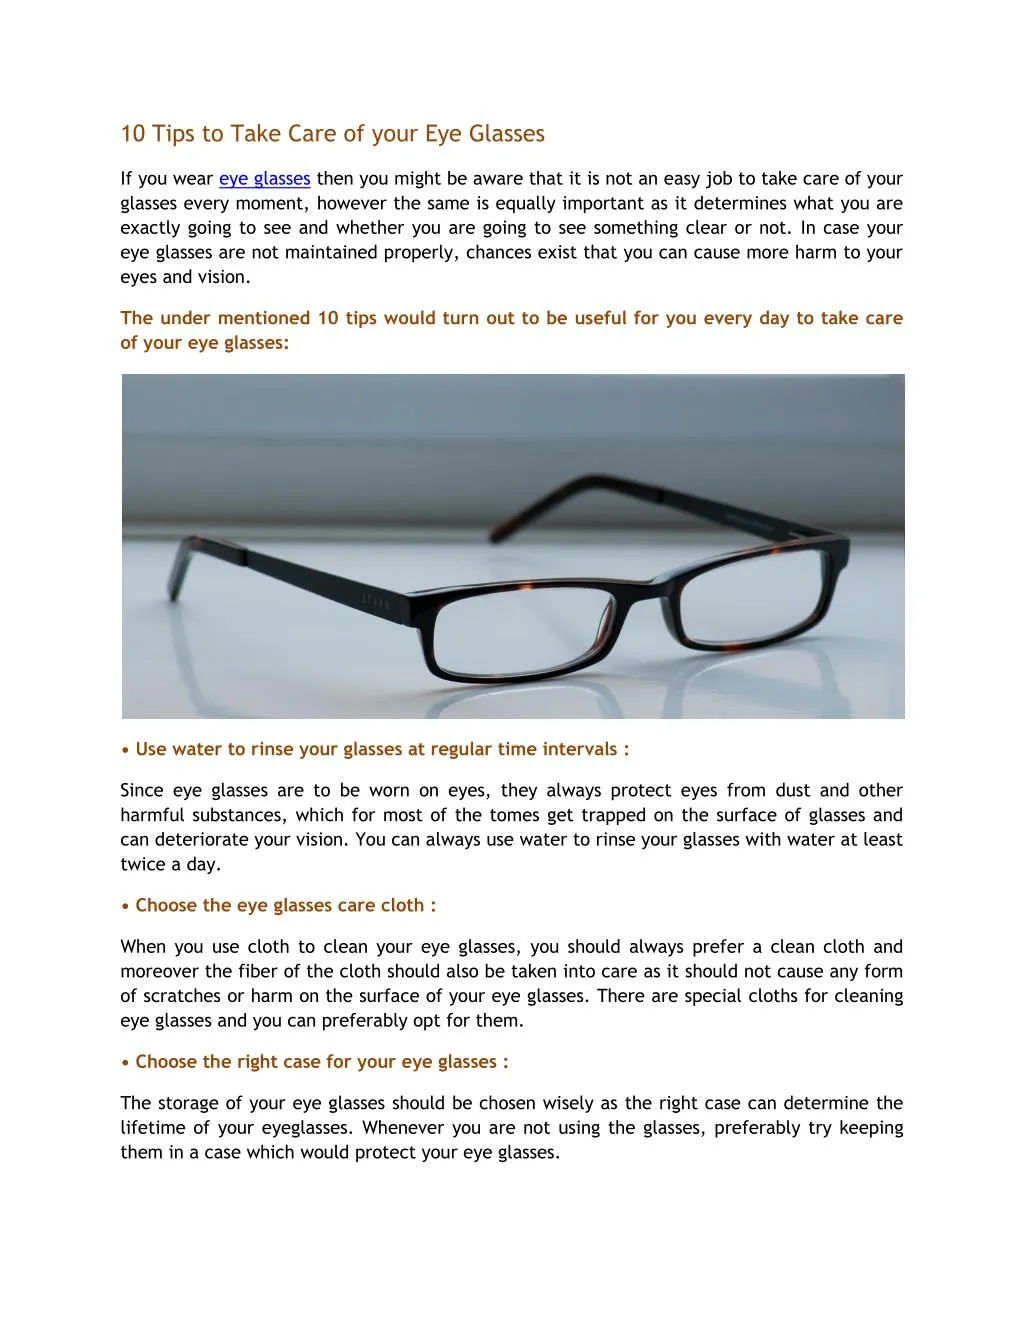 What's the right way to clean and care for your glasses?